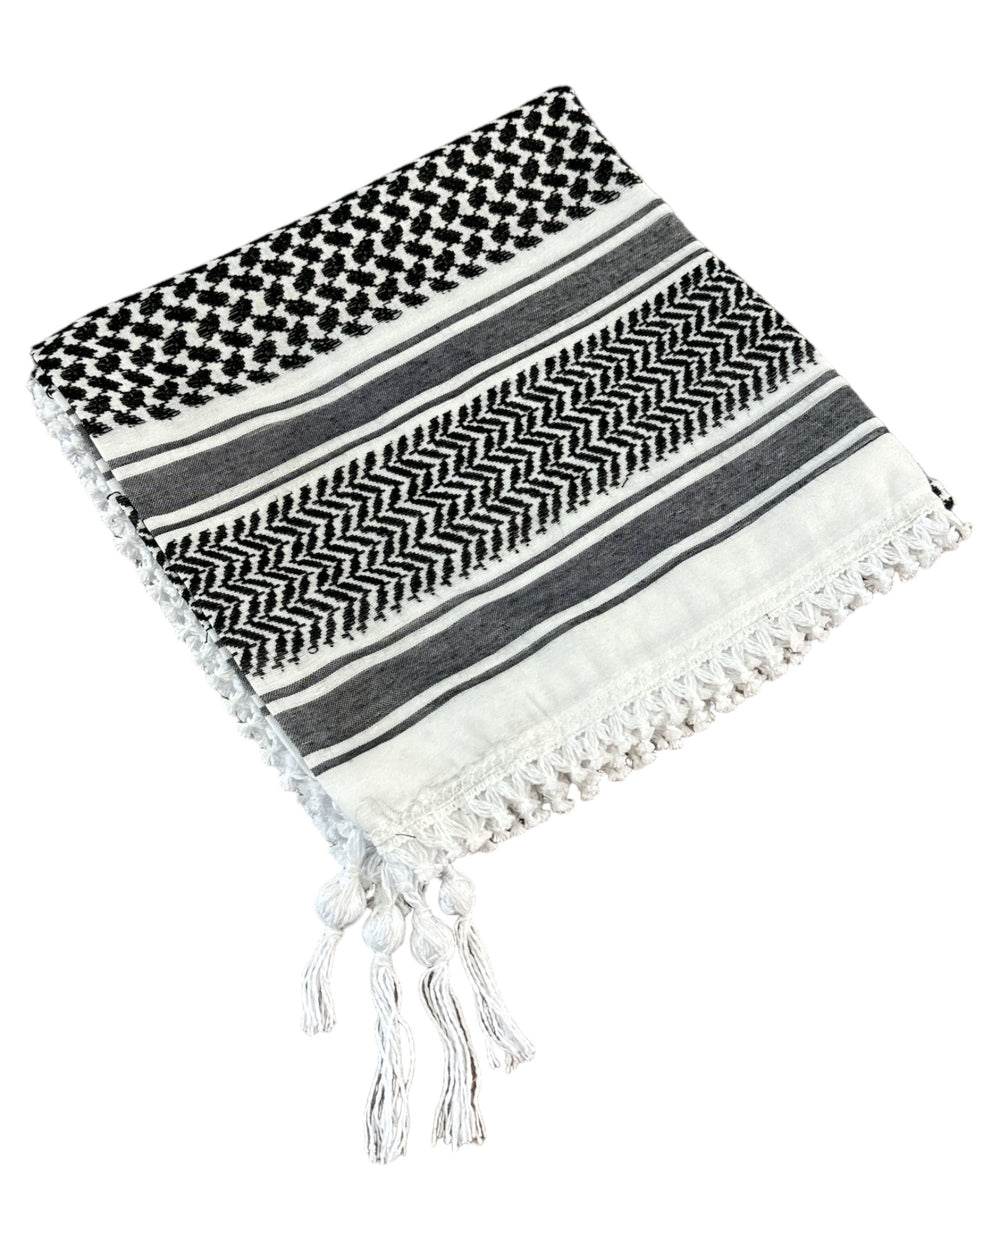 The Gaza Keffiyeh with White Tarboosh - A Tapestry of Resilience and Style